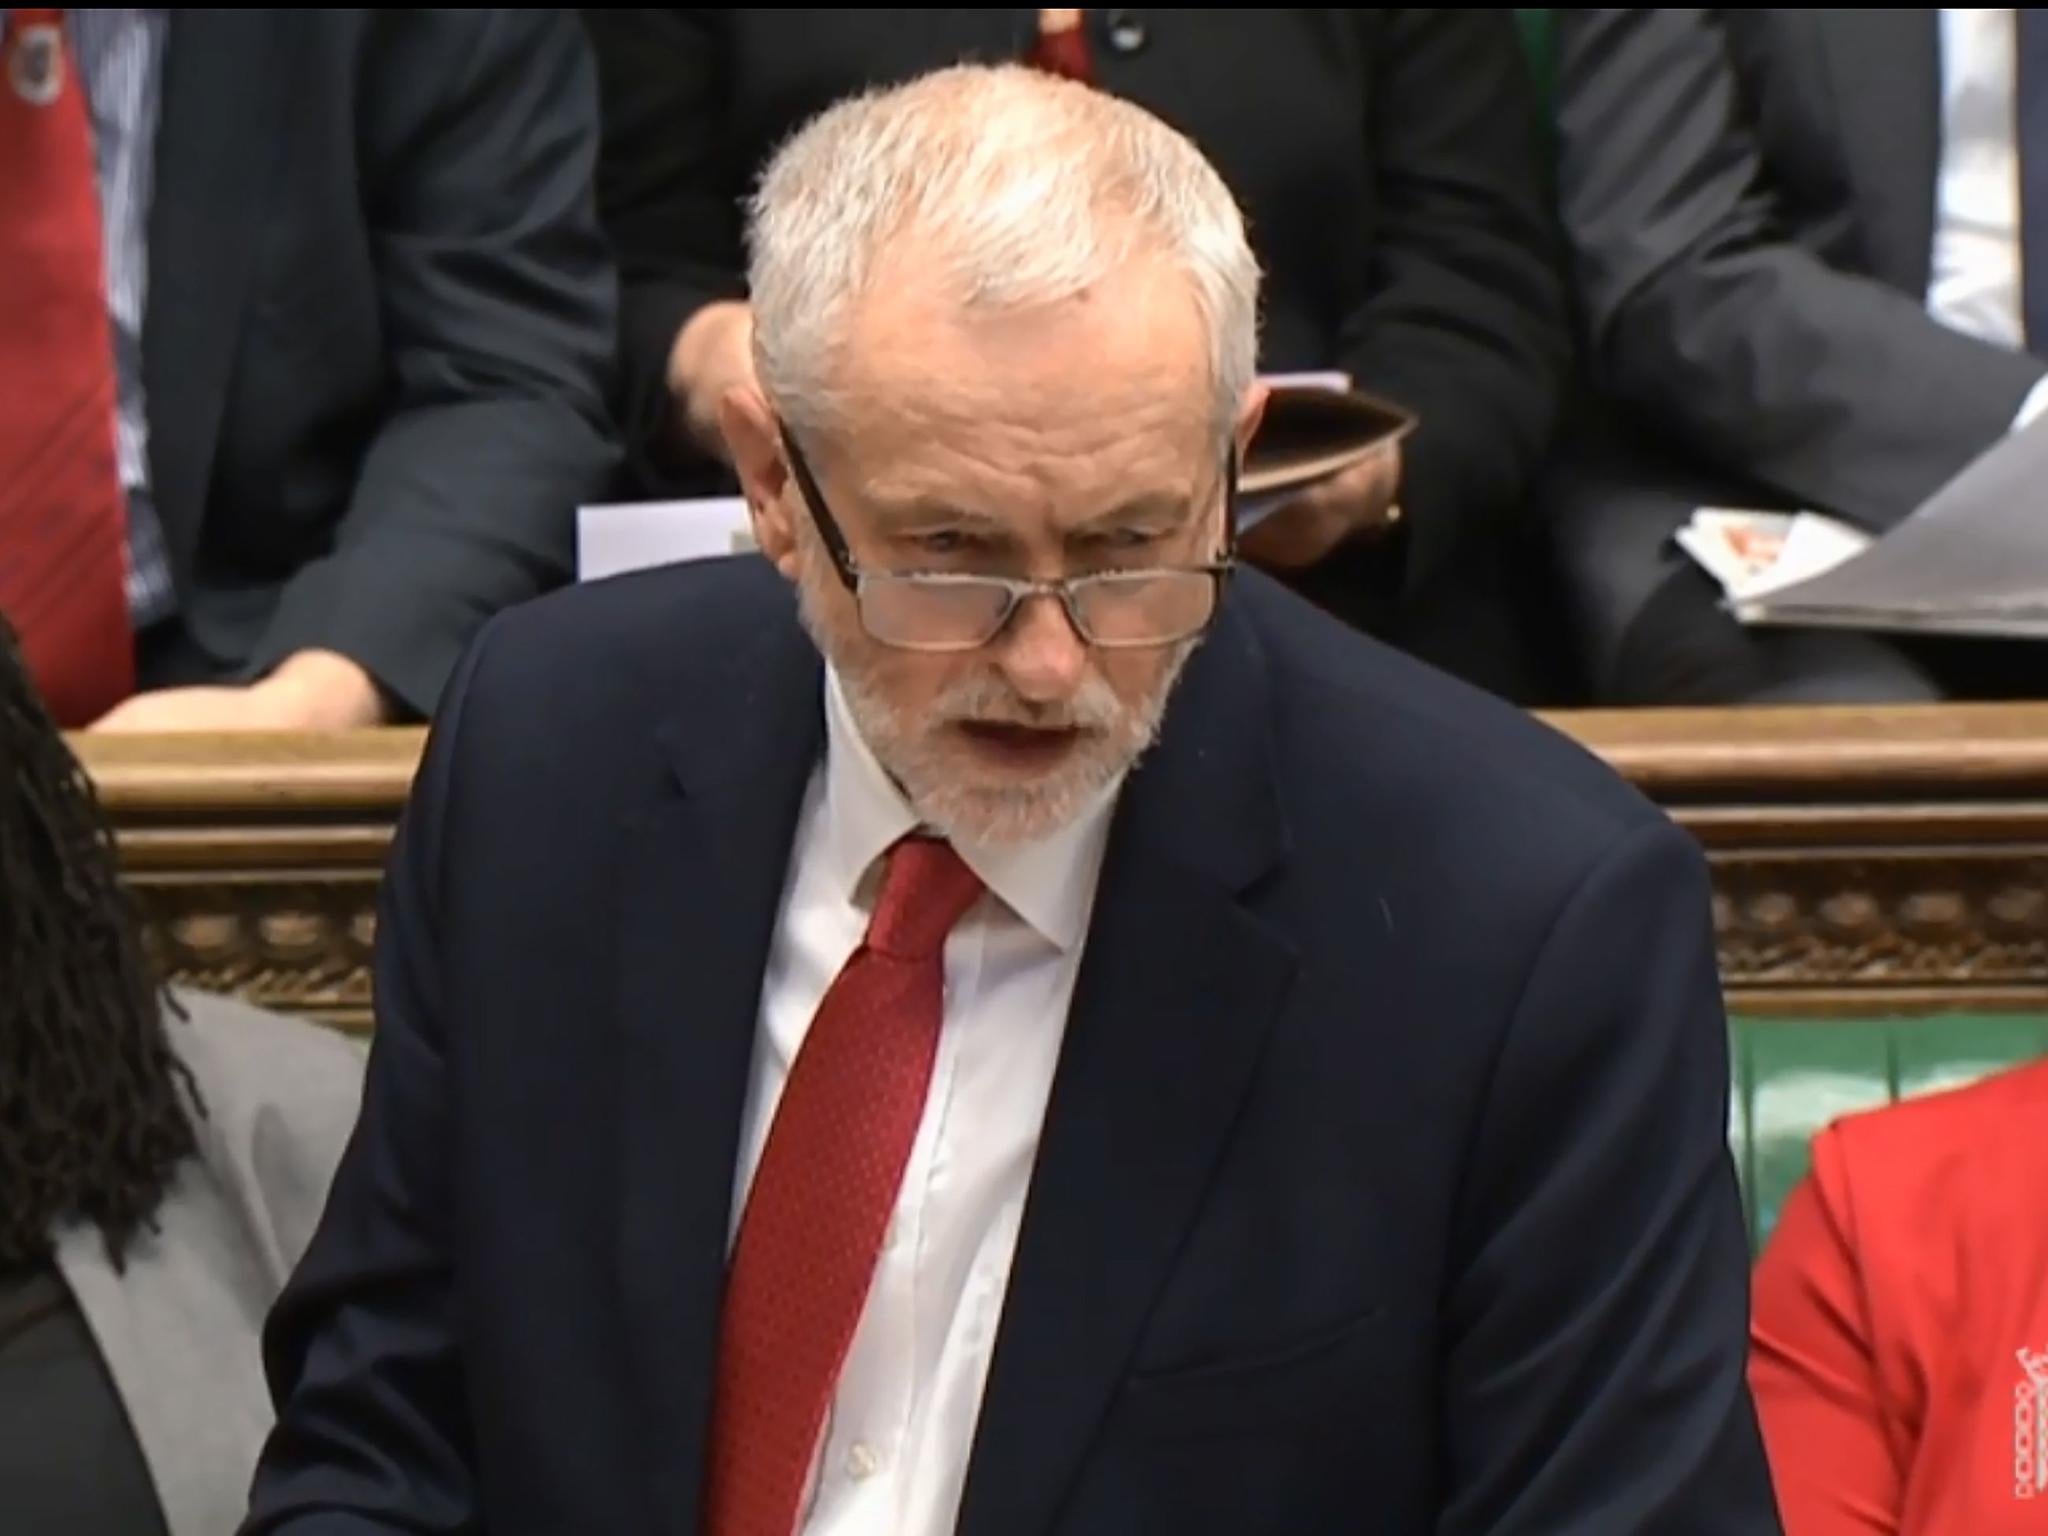 Mr Corbyn chose to cast doubt on the credibility of the British security services